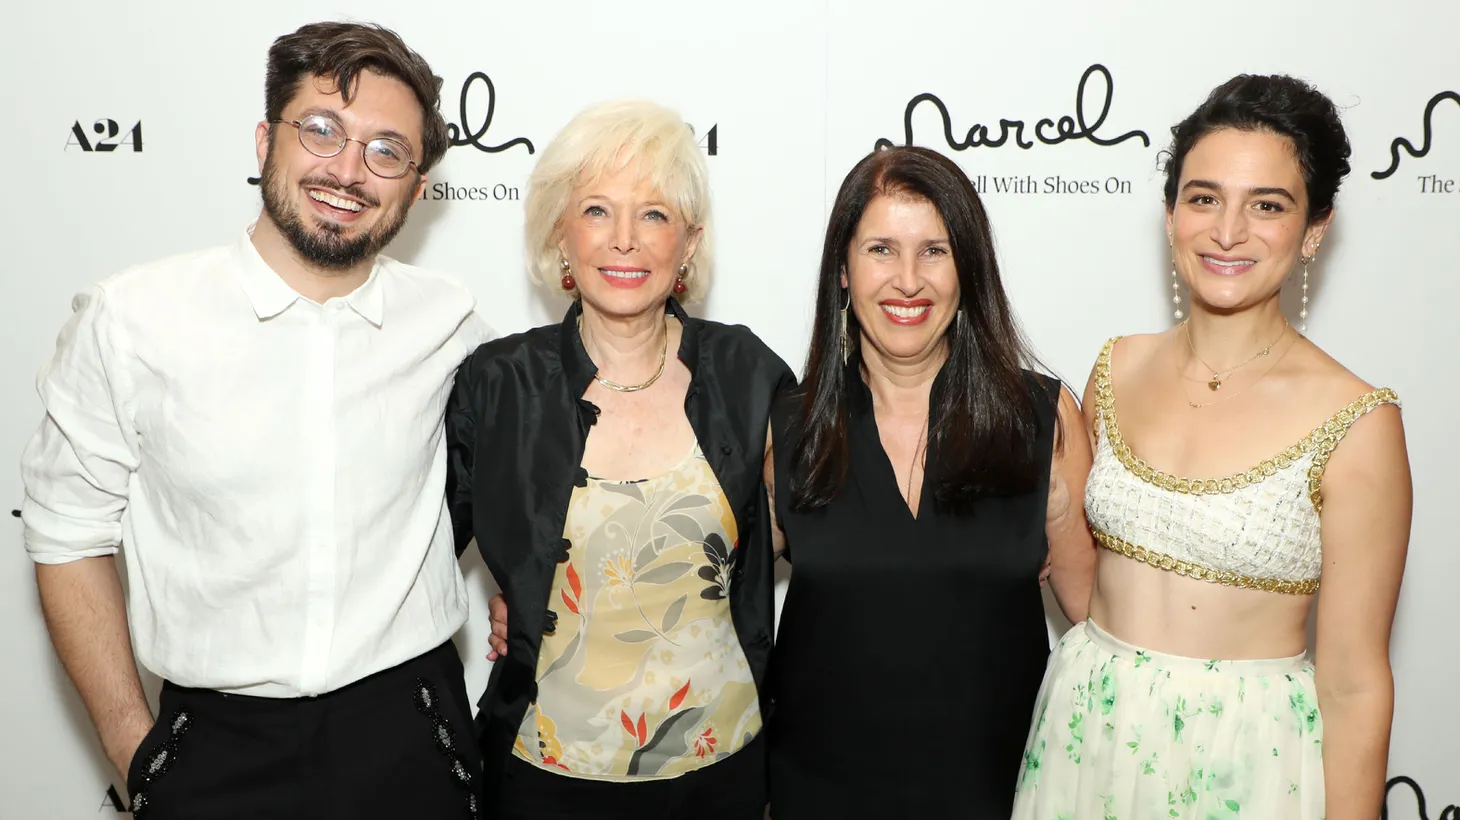 Dean Fleischer-Camp, Lesley Stahl, Caroline Kaplan, and Jenny Slate attend New York Special Screening of “Marcel the Shell With Shoes On” in New York City..